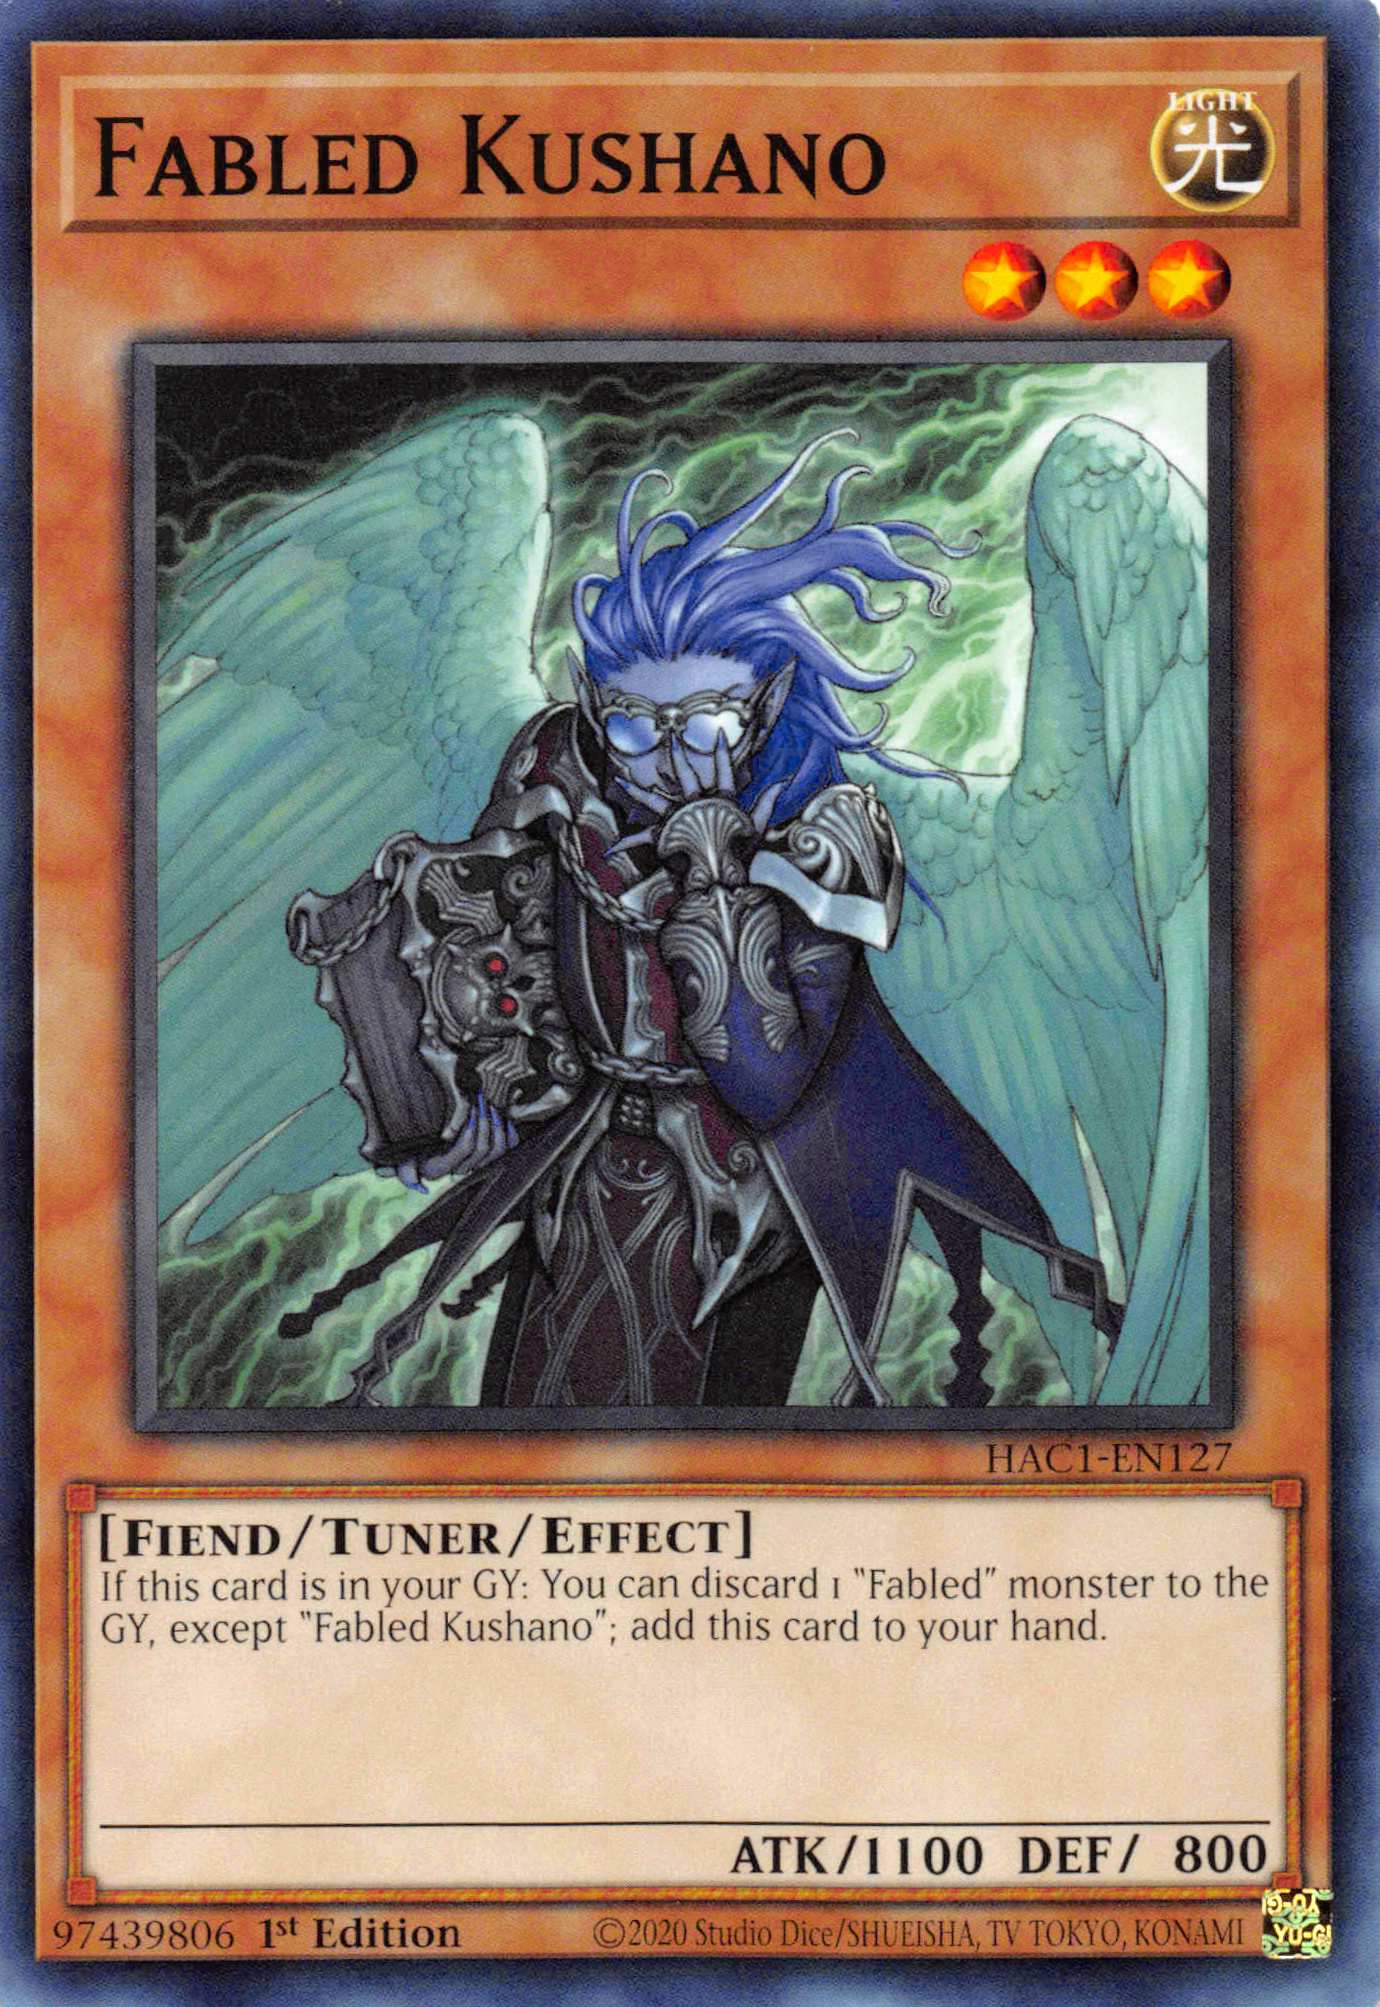 Fabled Kushano [HAC1-EN127] Common - Duel Kingdom